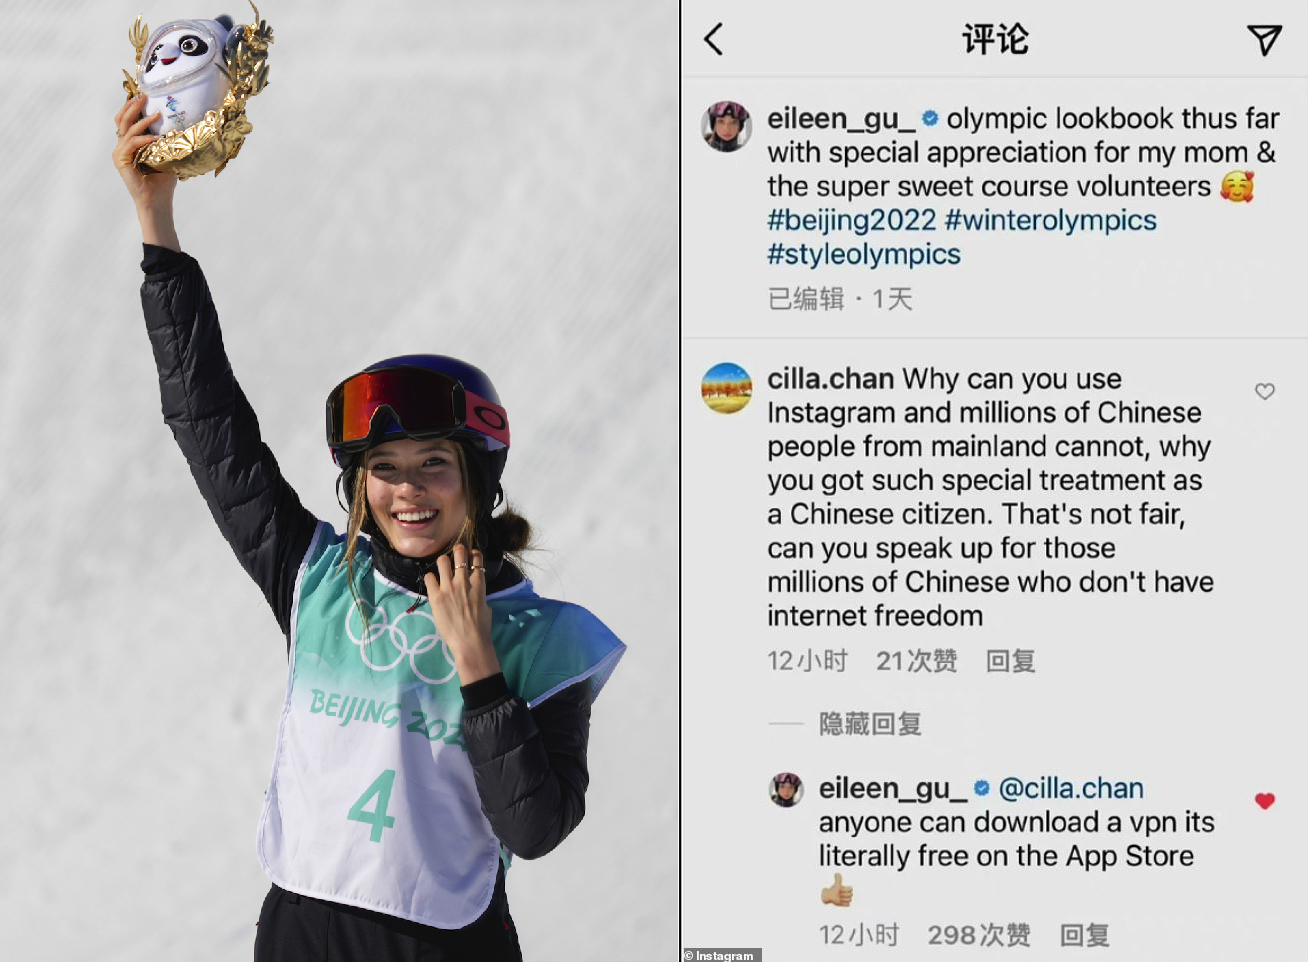 Gold Medalist Eileen Gu Says There's No Internet Censorship in